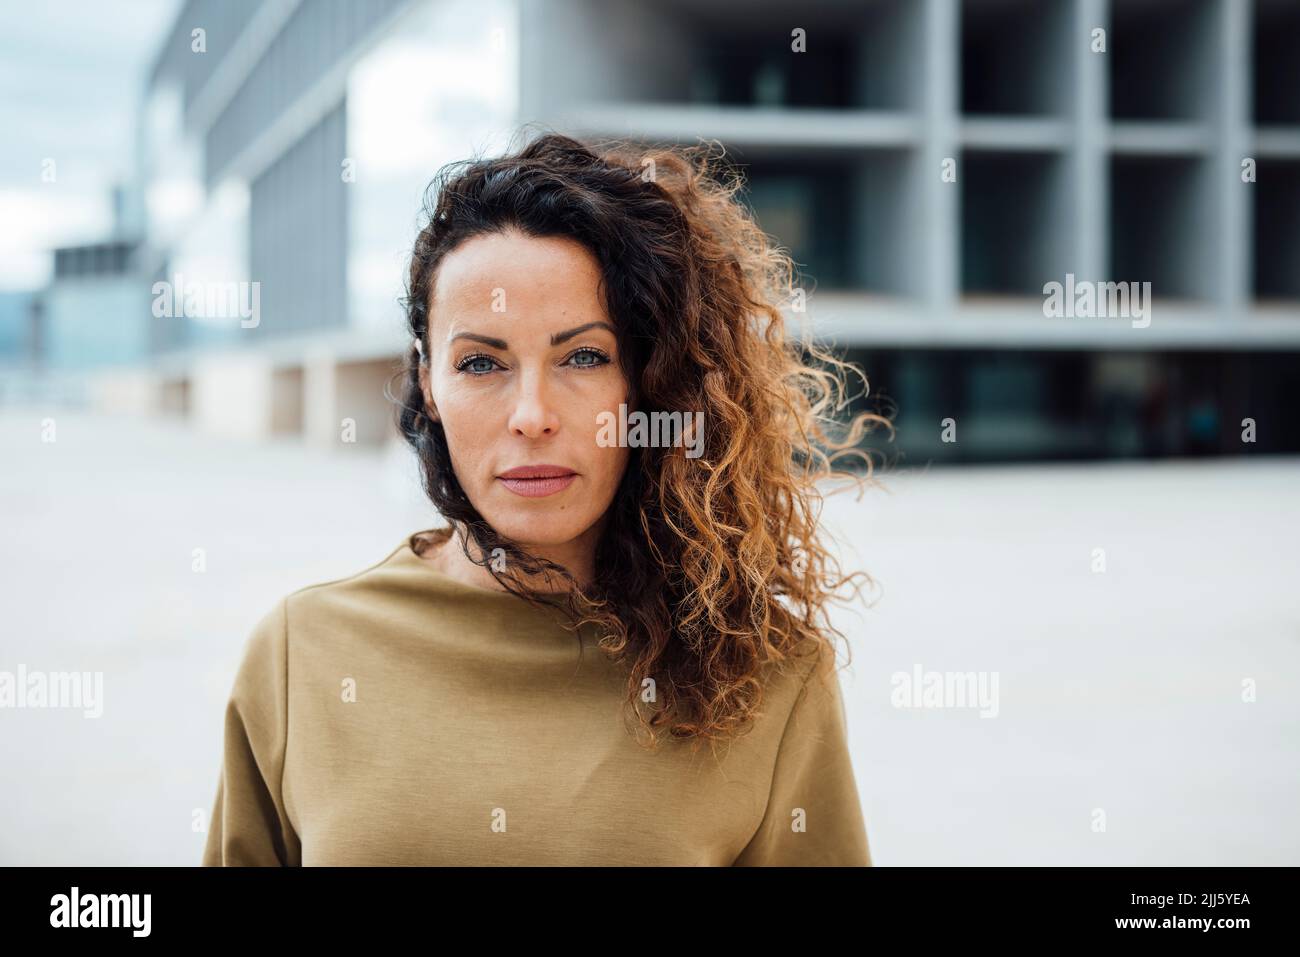 Confident businesswoman with curly hair Stock Photo